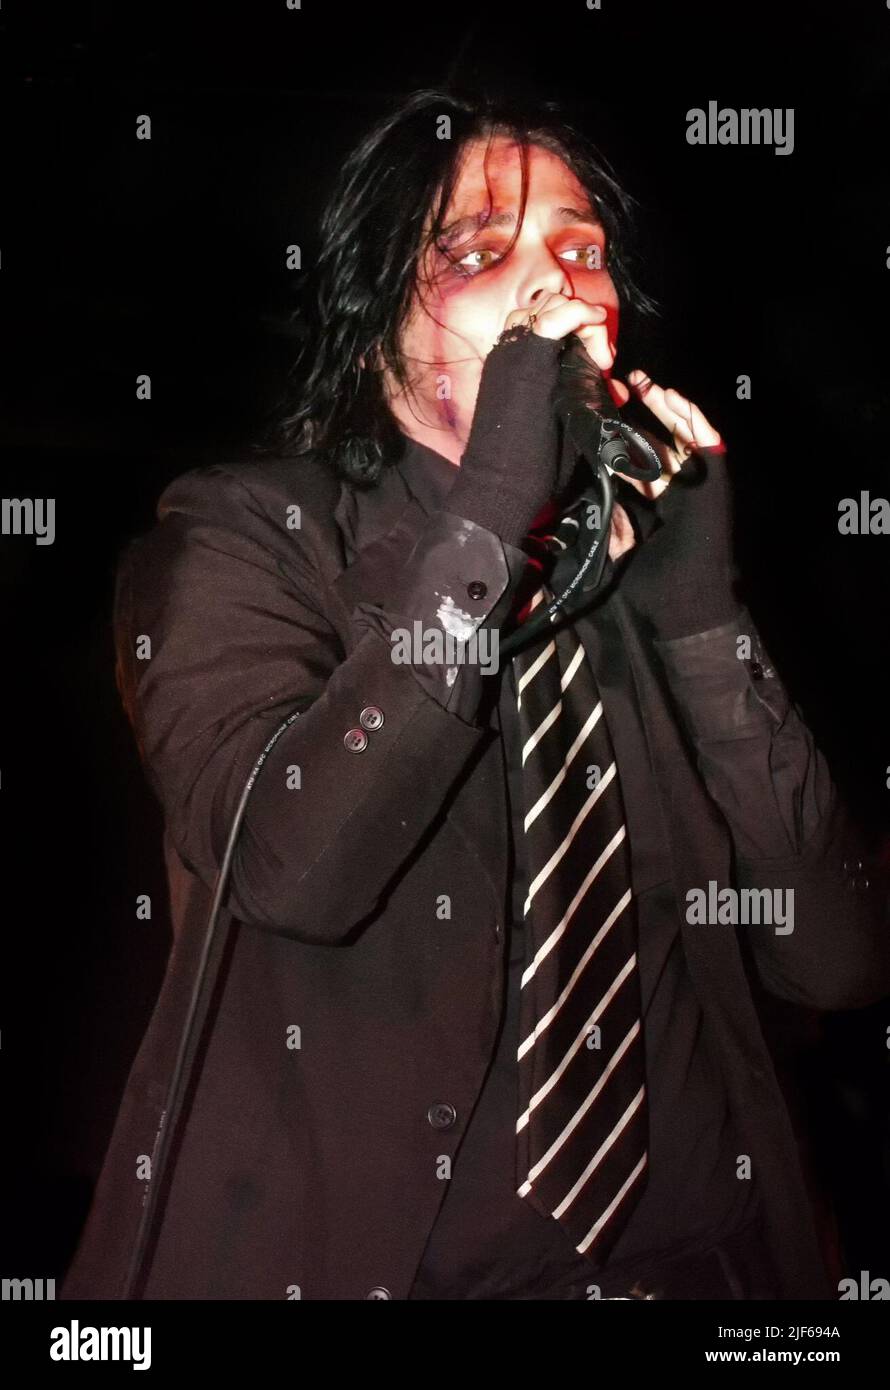 Gerard Way of My Chemical Romance live in concert on stage at Birmingham Carling Academy 2, 13th September 2004 Stock Photo